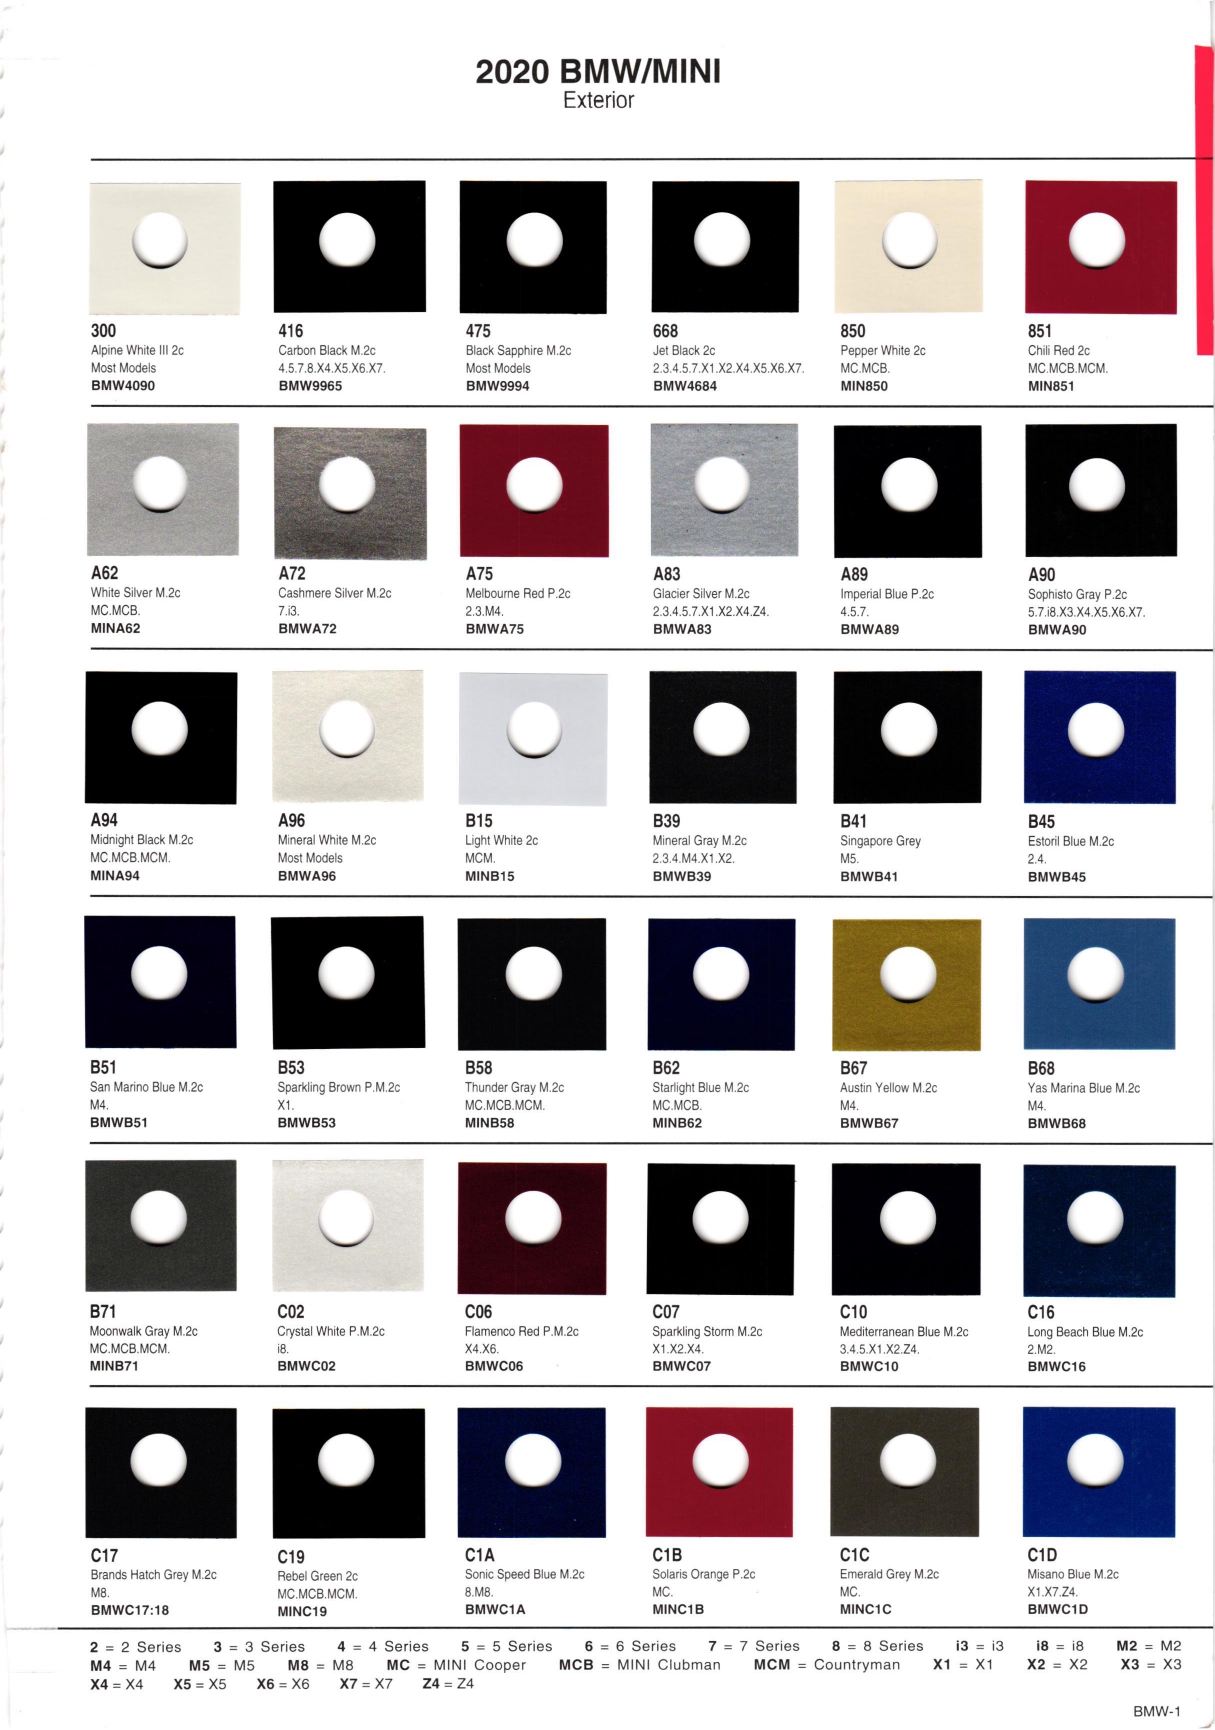 Exterior Color Chips, and their ordering codes for BMW Vehicles in 2020